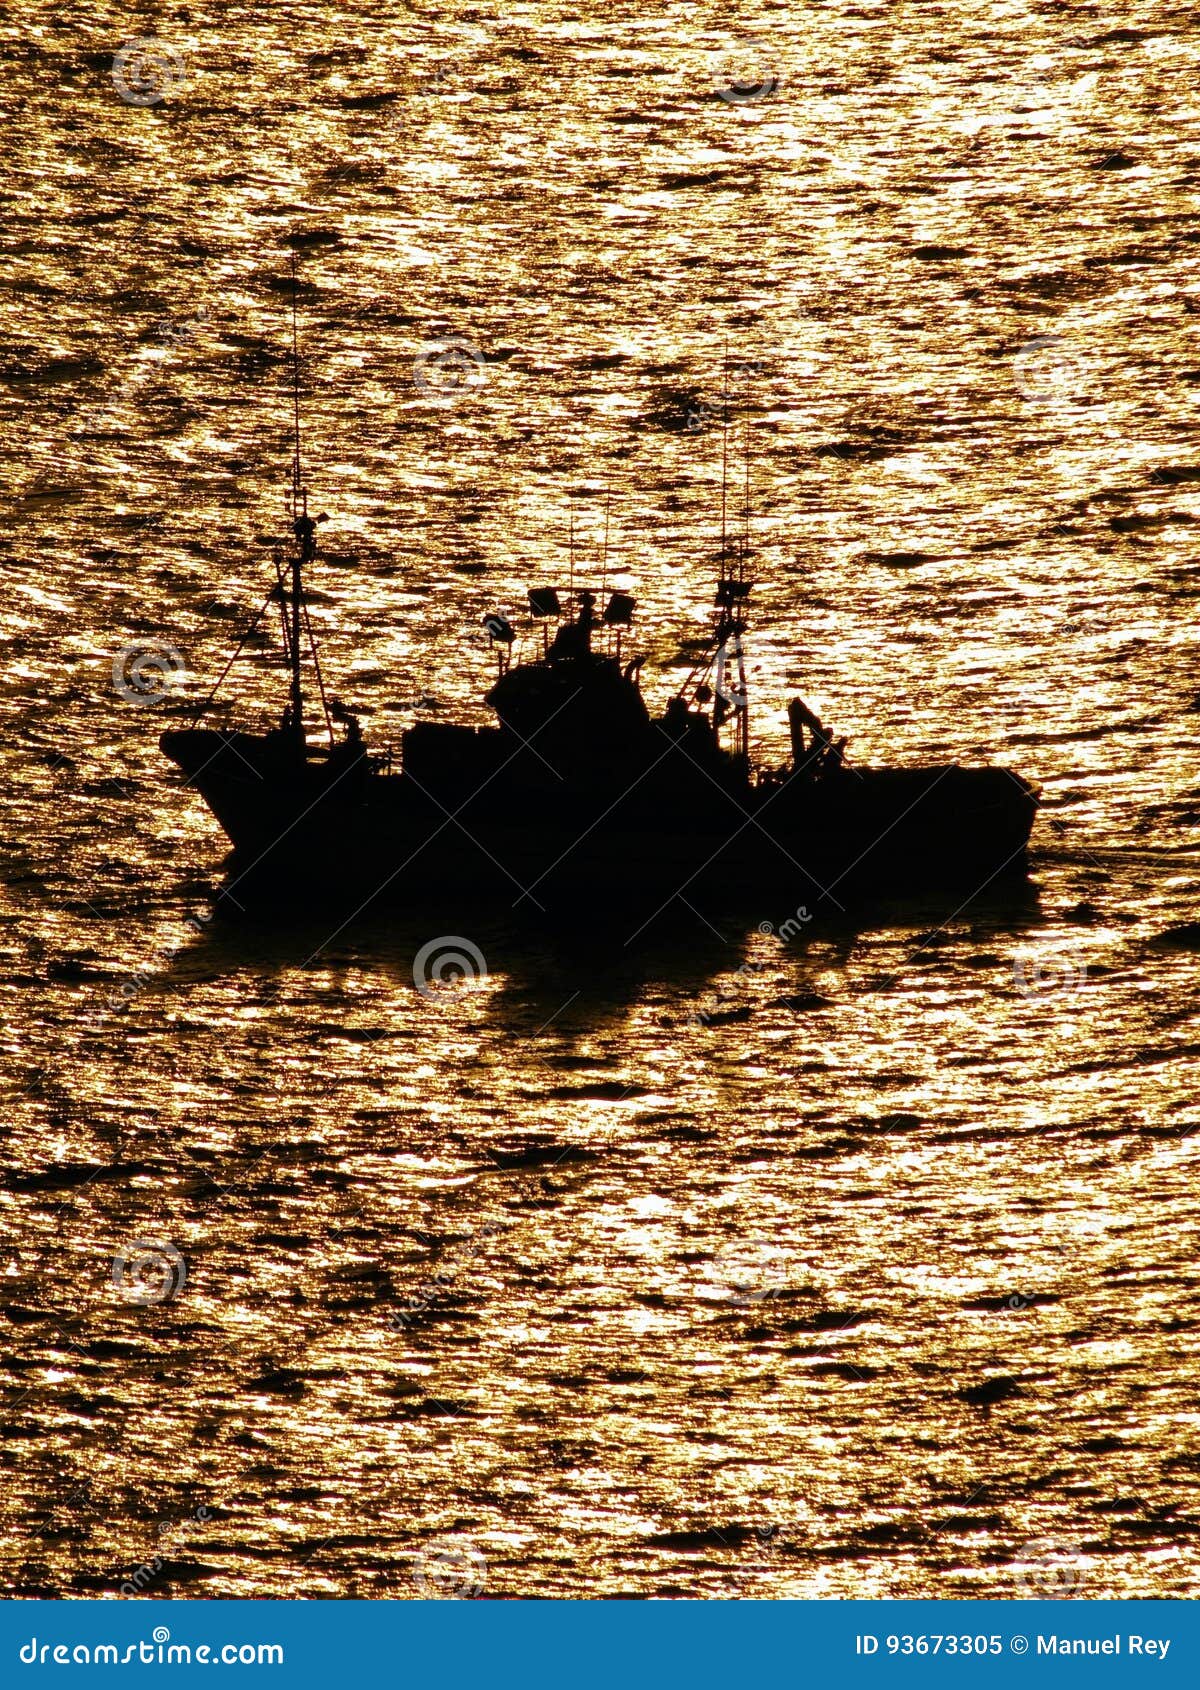 afternoon gold boat